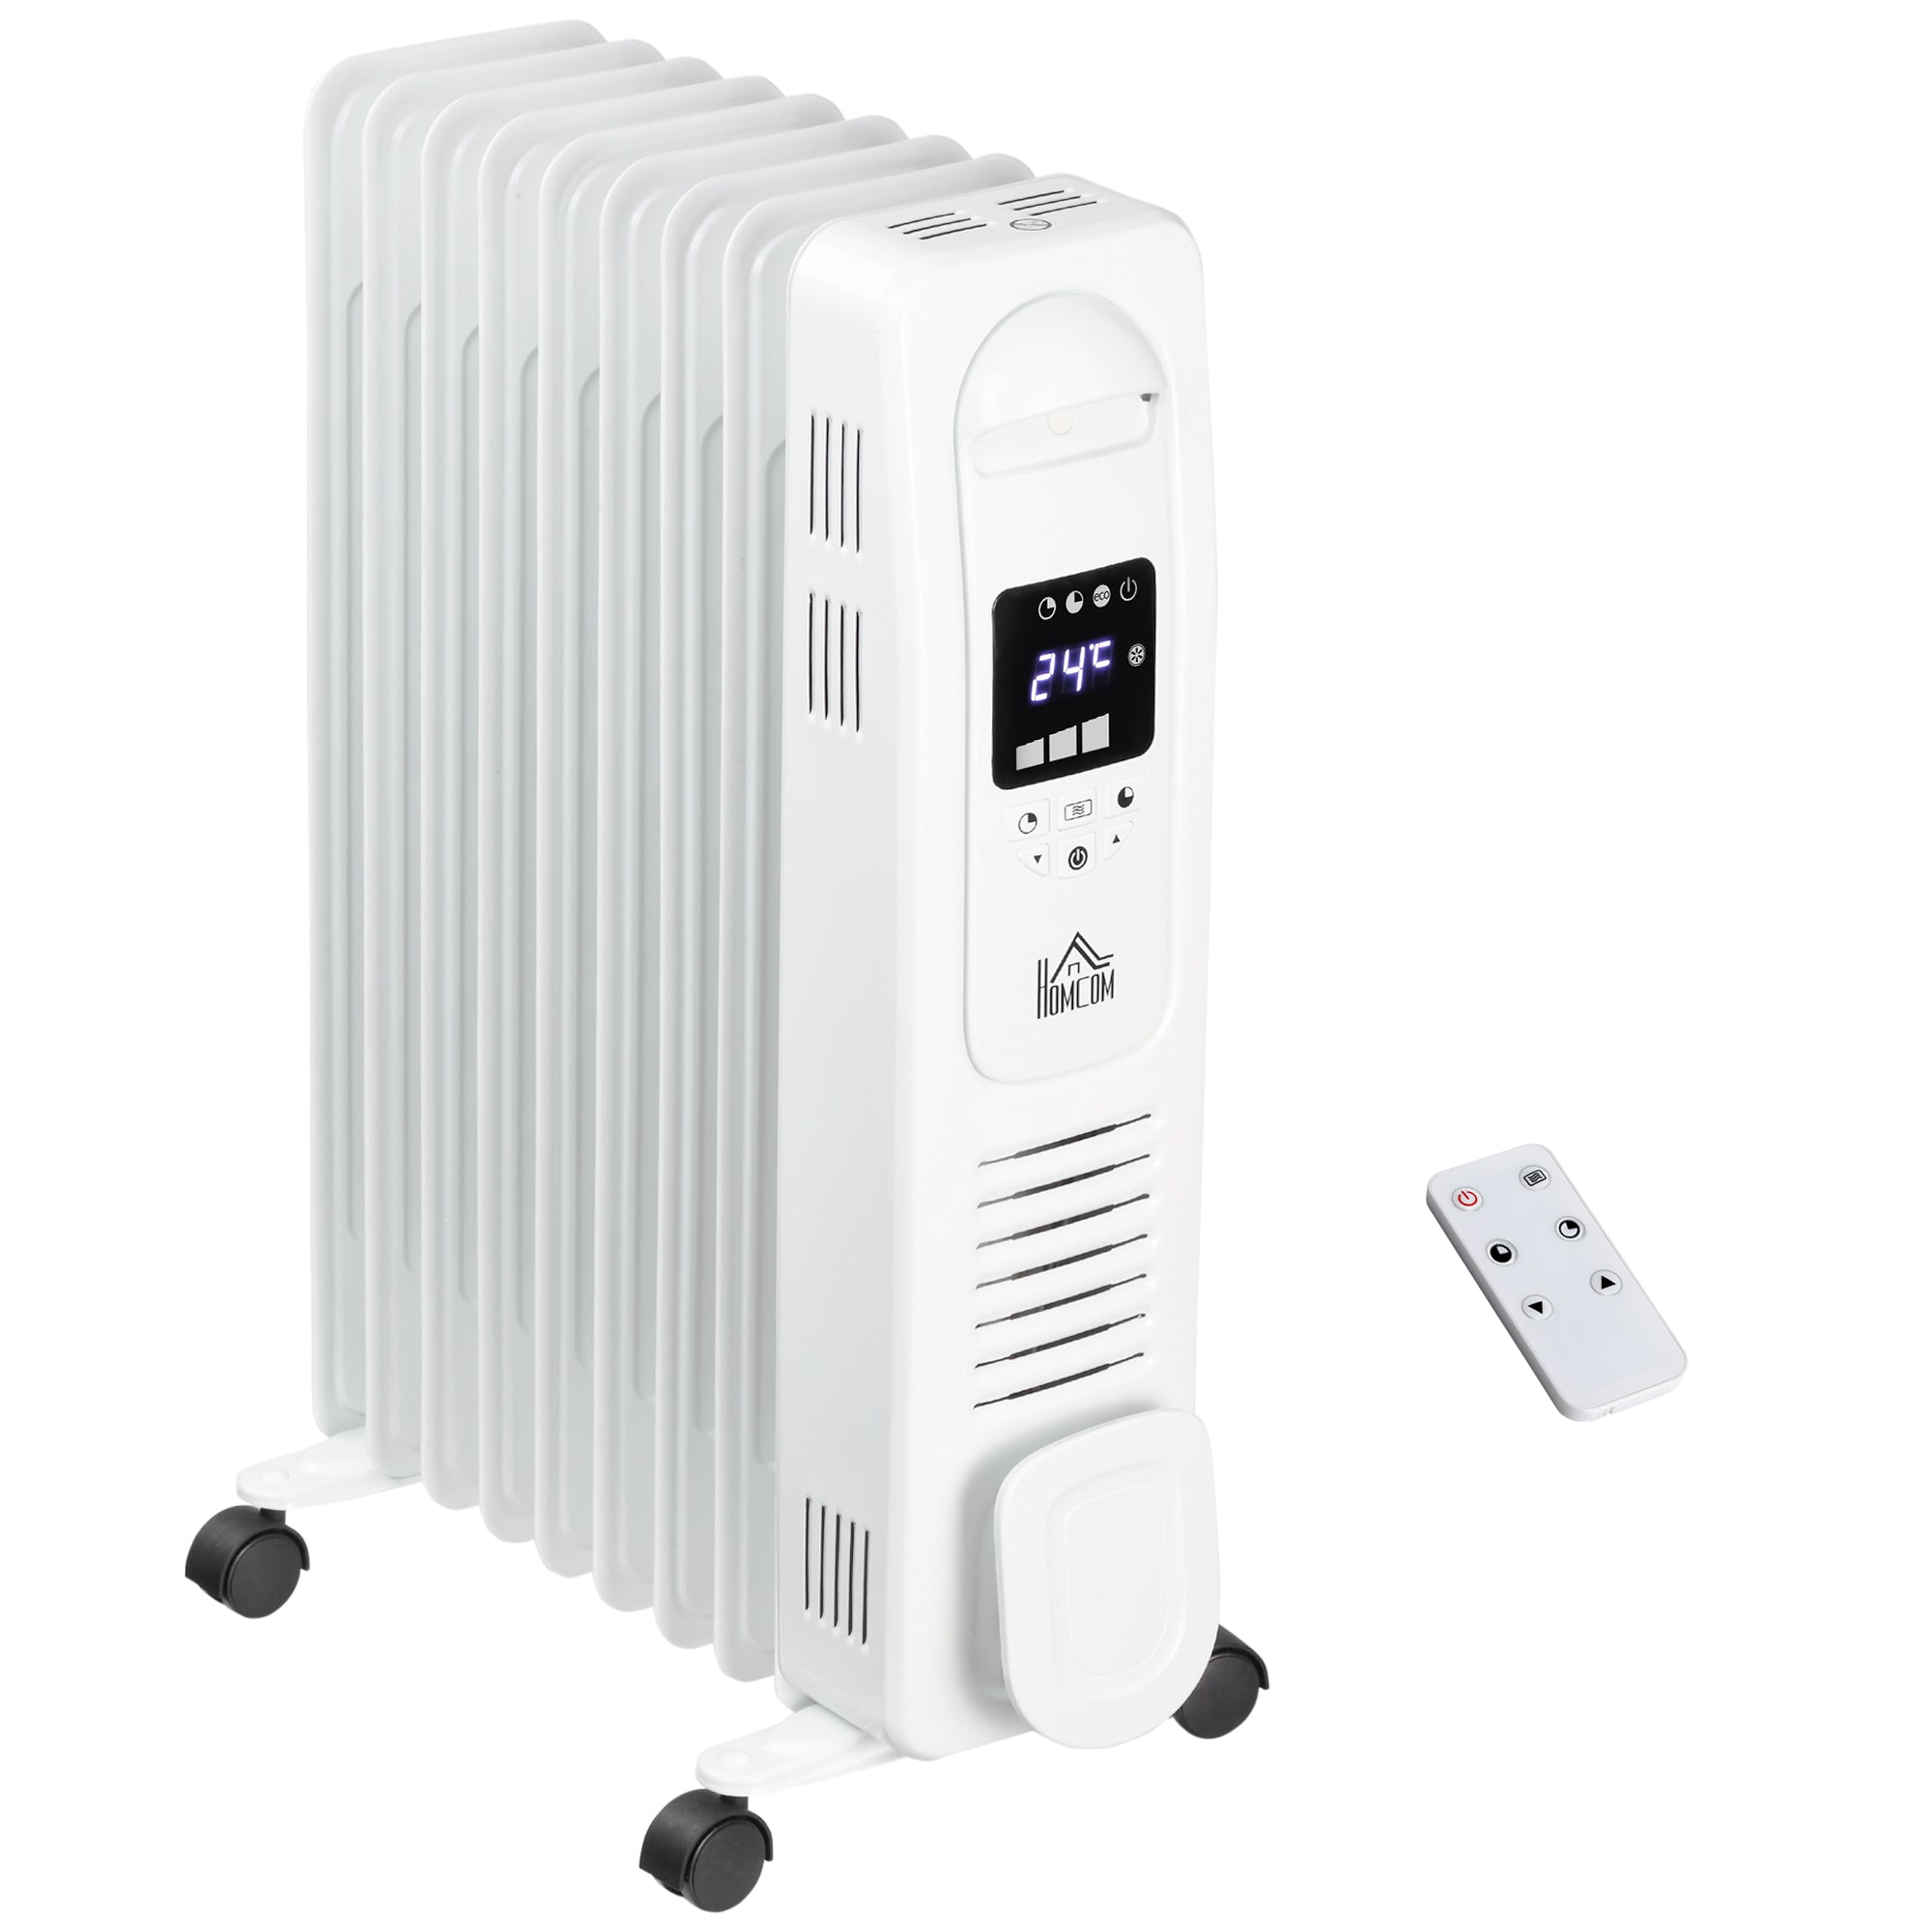 HOMCOM 2180W Oil Filled Radiator - 9 Fin Portable Heater w/ Timer Remote Control White Safety Cut-Off and Remote Control White Radiator Settings  | TJ